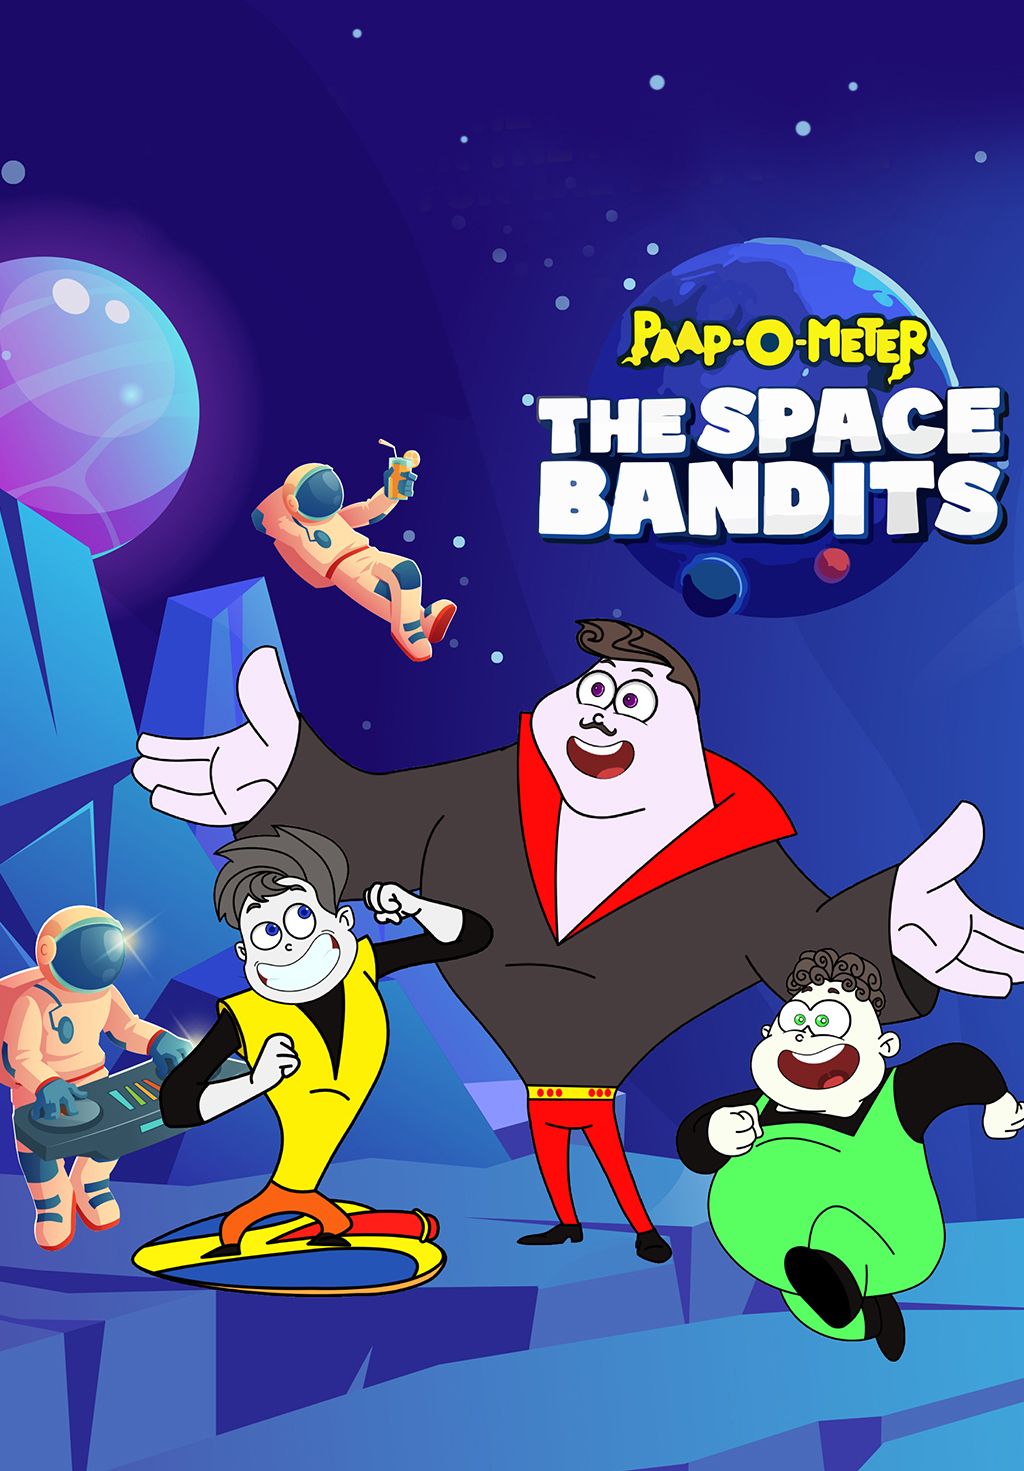 Paap-O-Meter and The Space Bandits